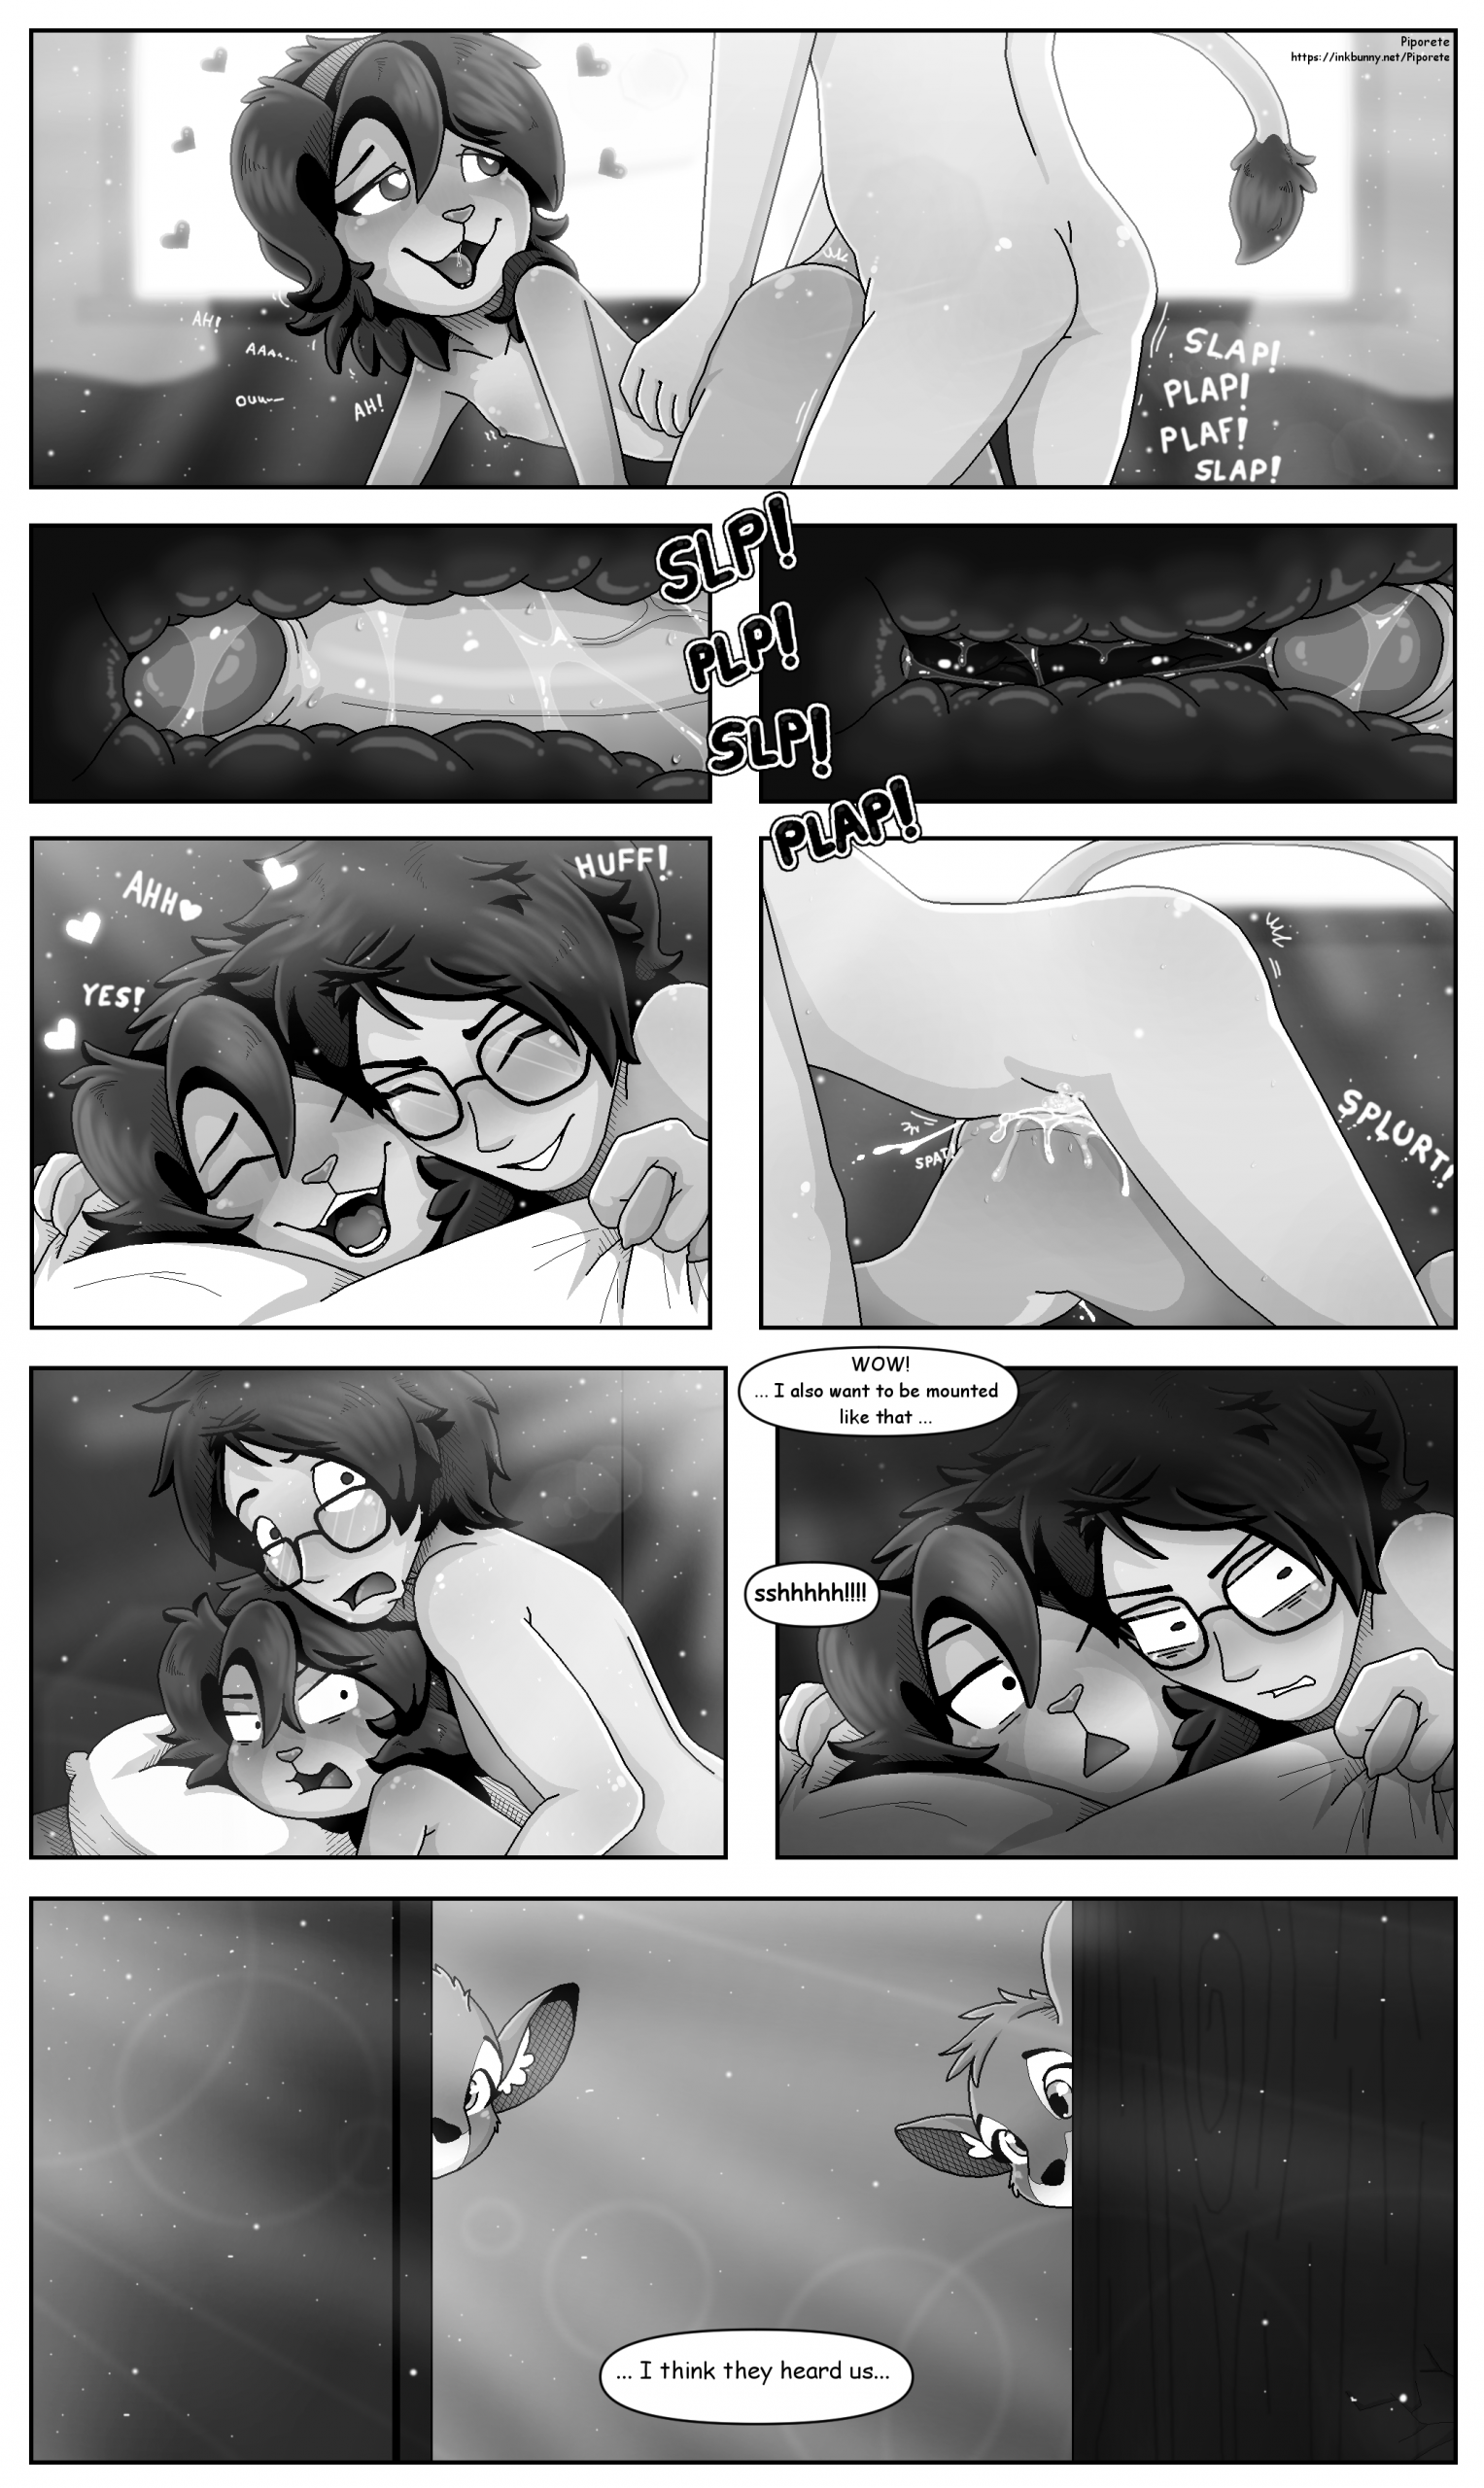 Keiko and Jin - Chapter 1 - 3 porn comic picture 53